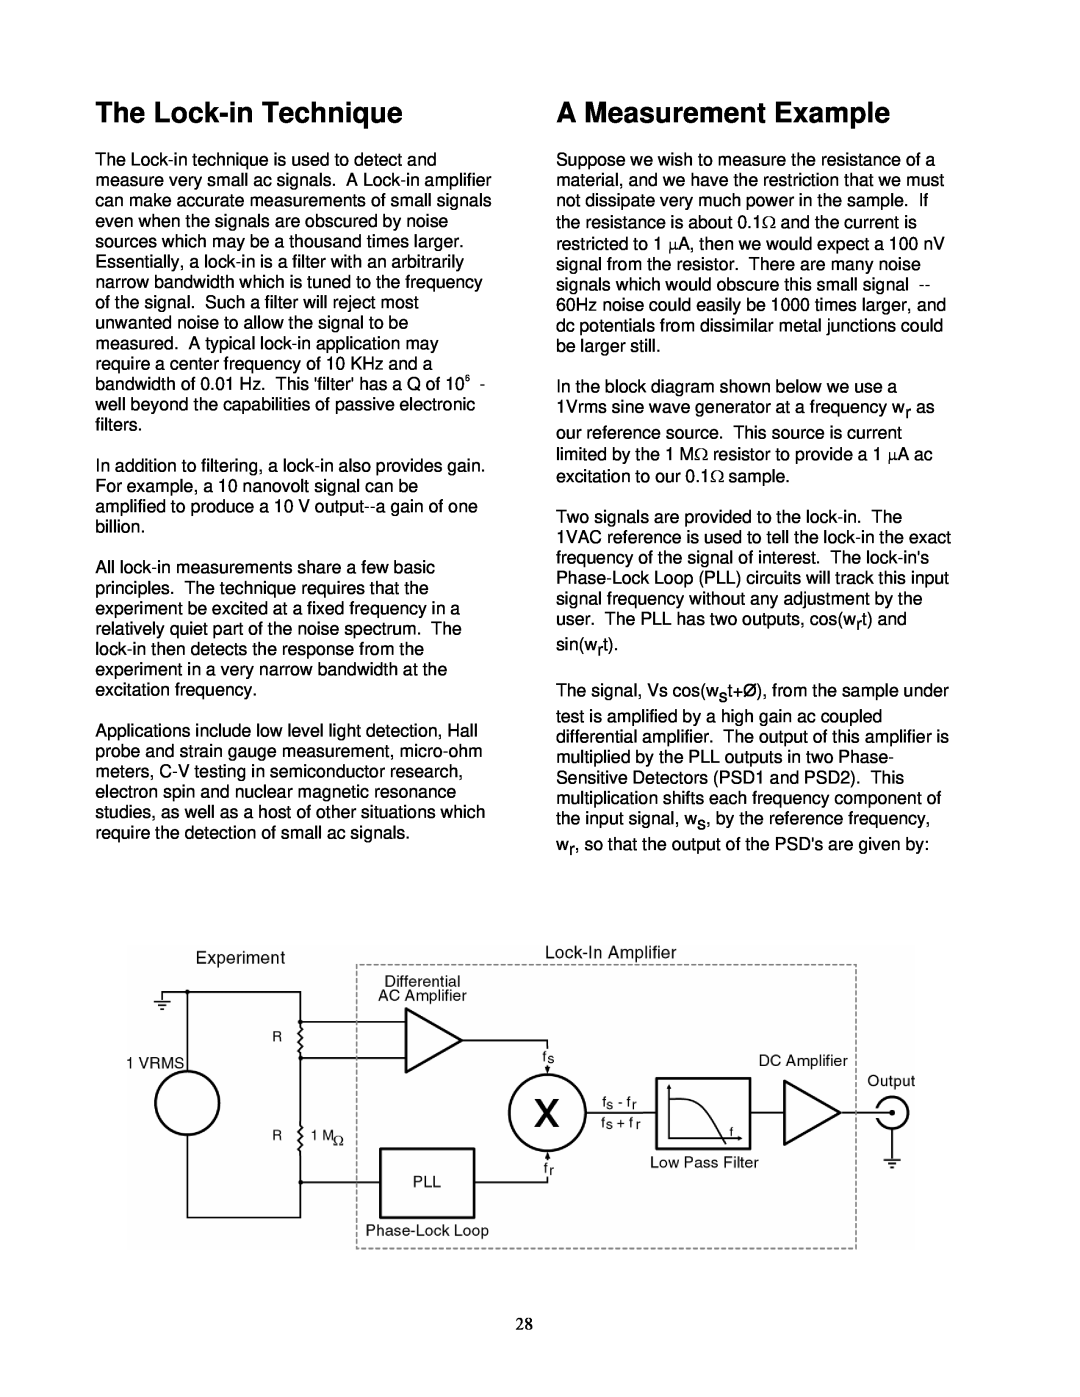 SRS Labs Lock-In Amplifier, SR530 manual The Lock-inTechnique, A Measurement Example 